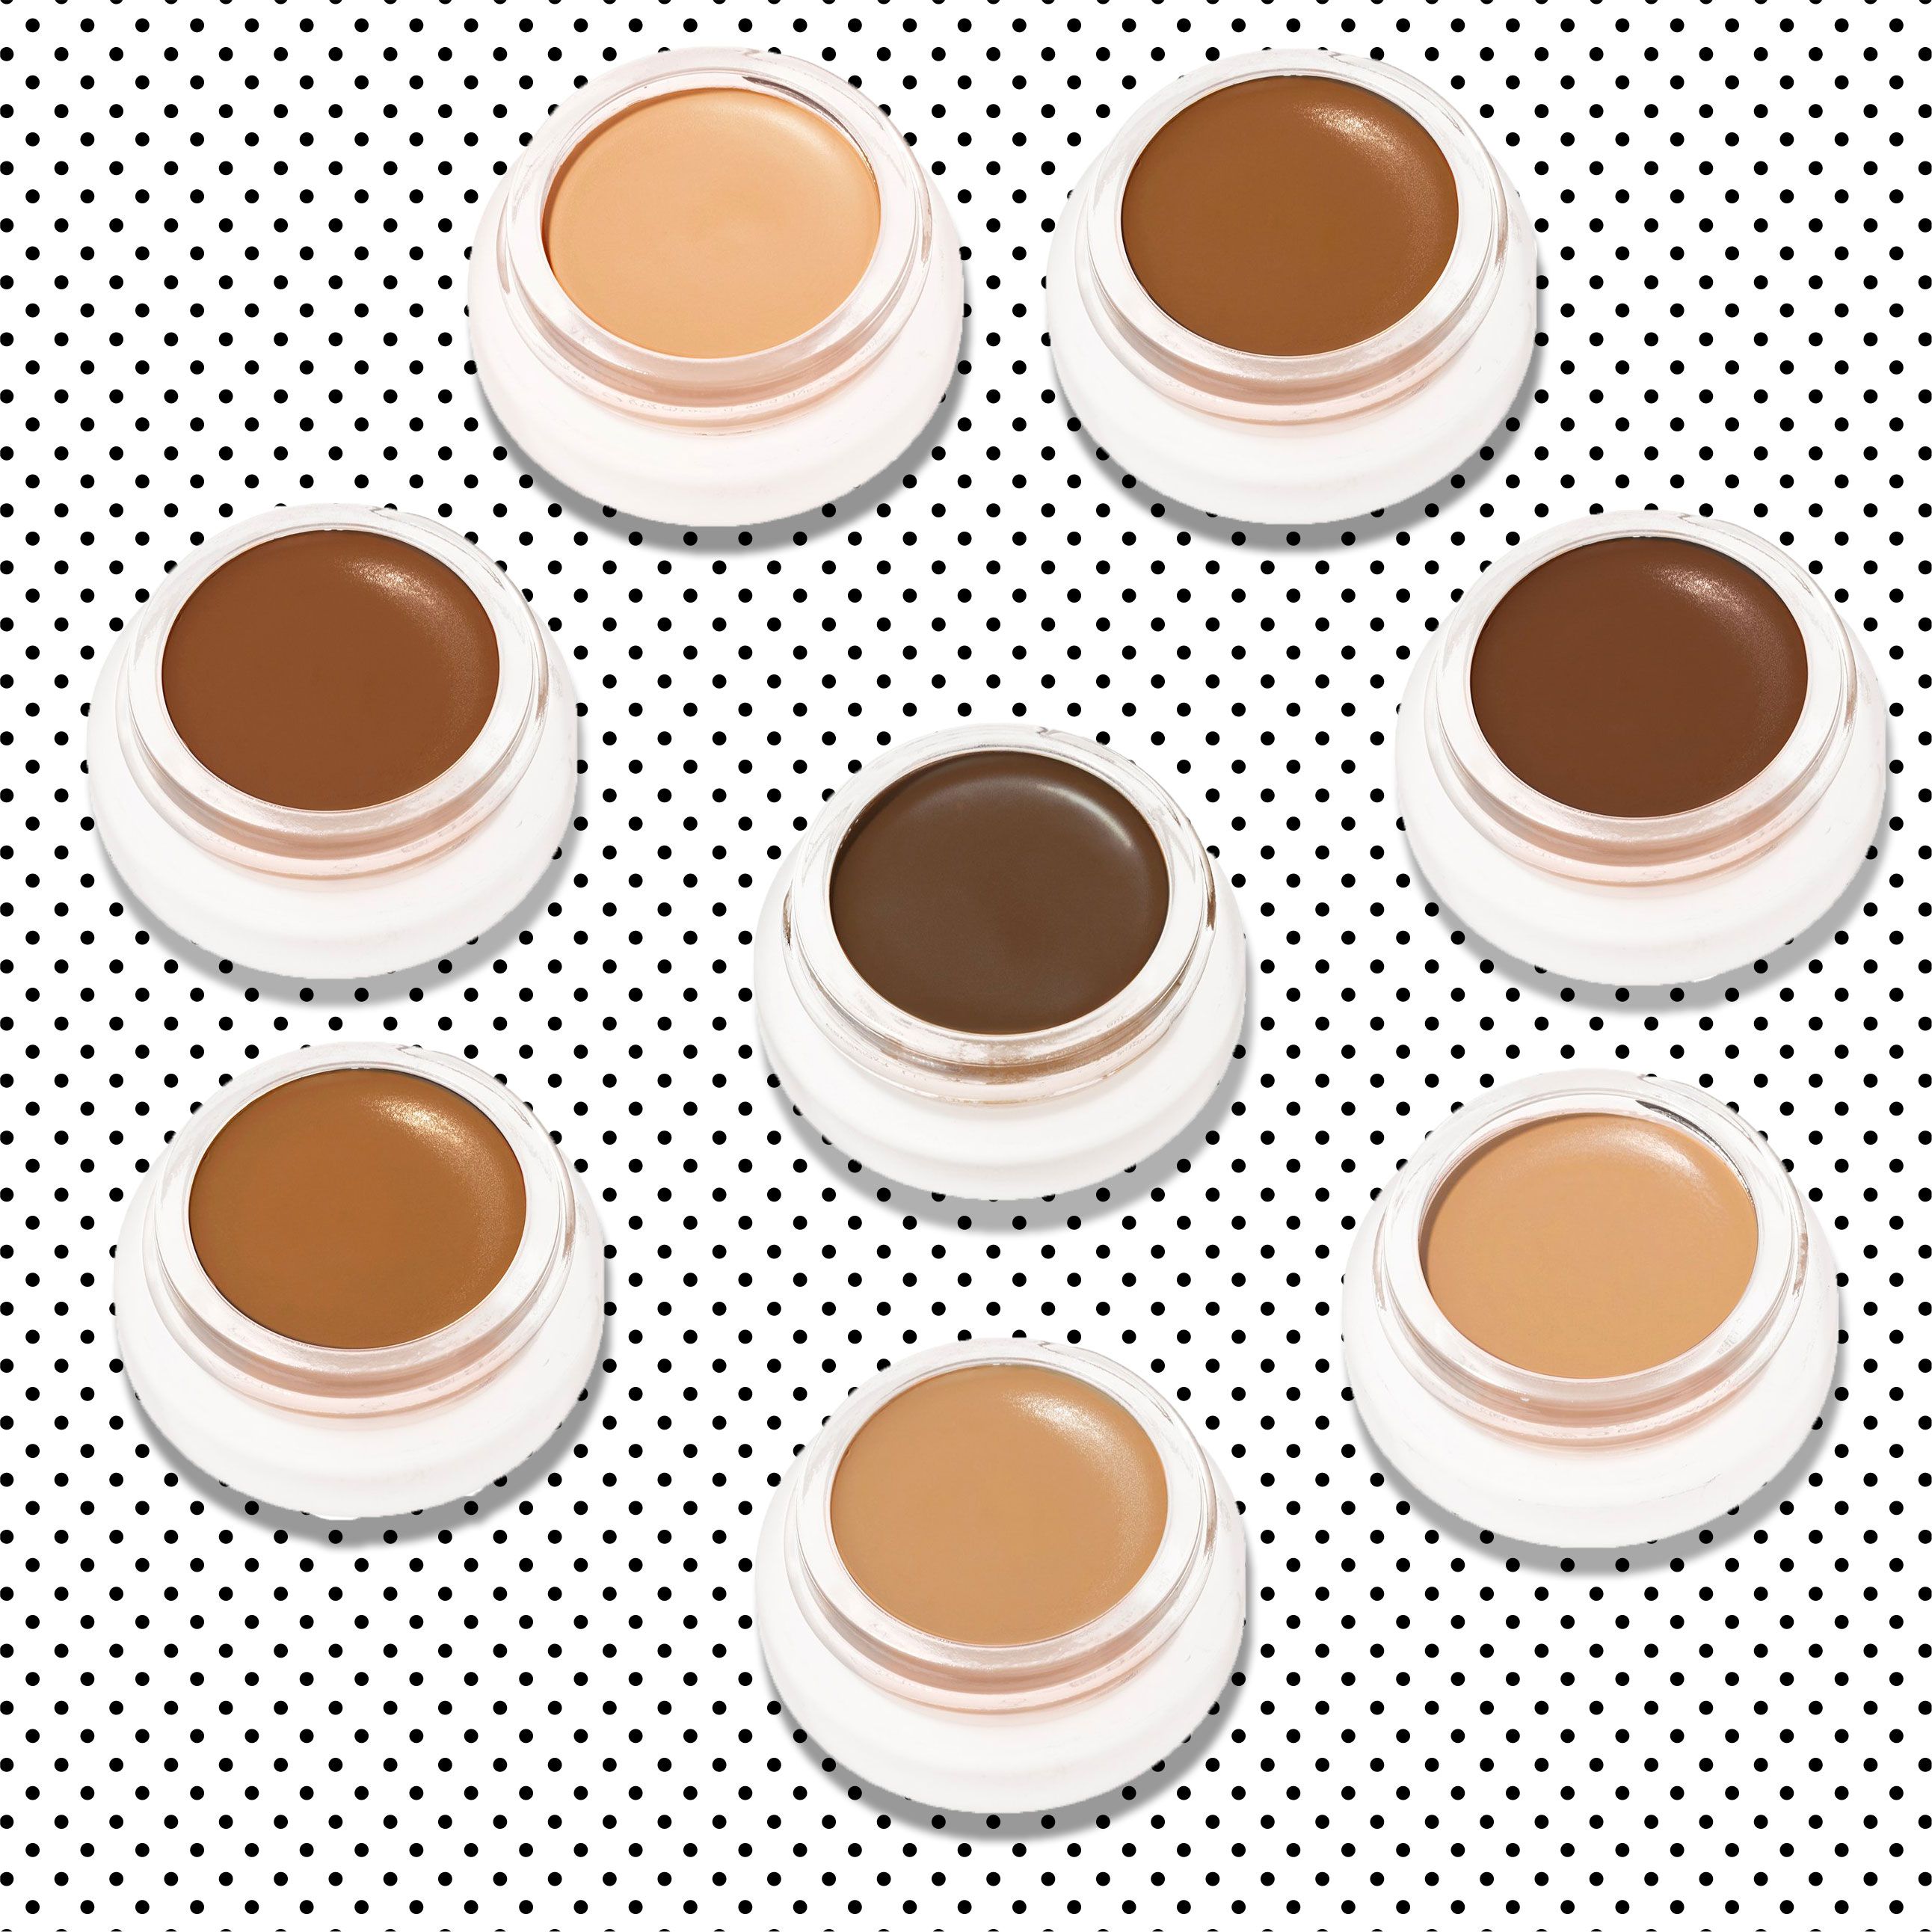 RMS Beauty Has New Darker 'Un' Cover-up Foundation